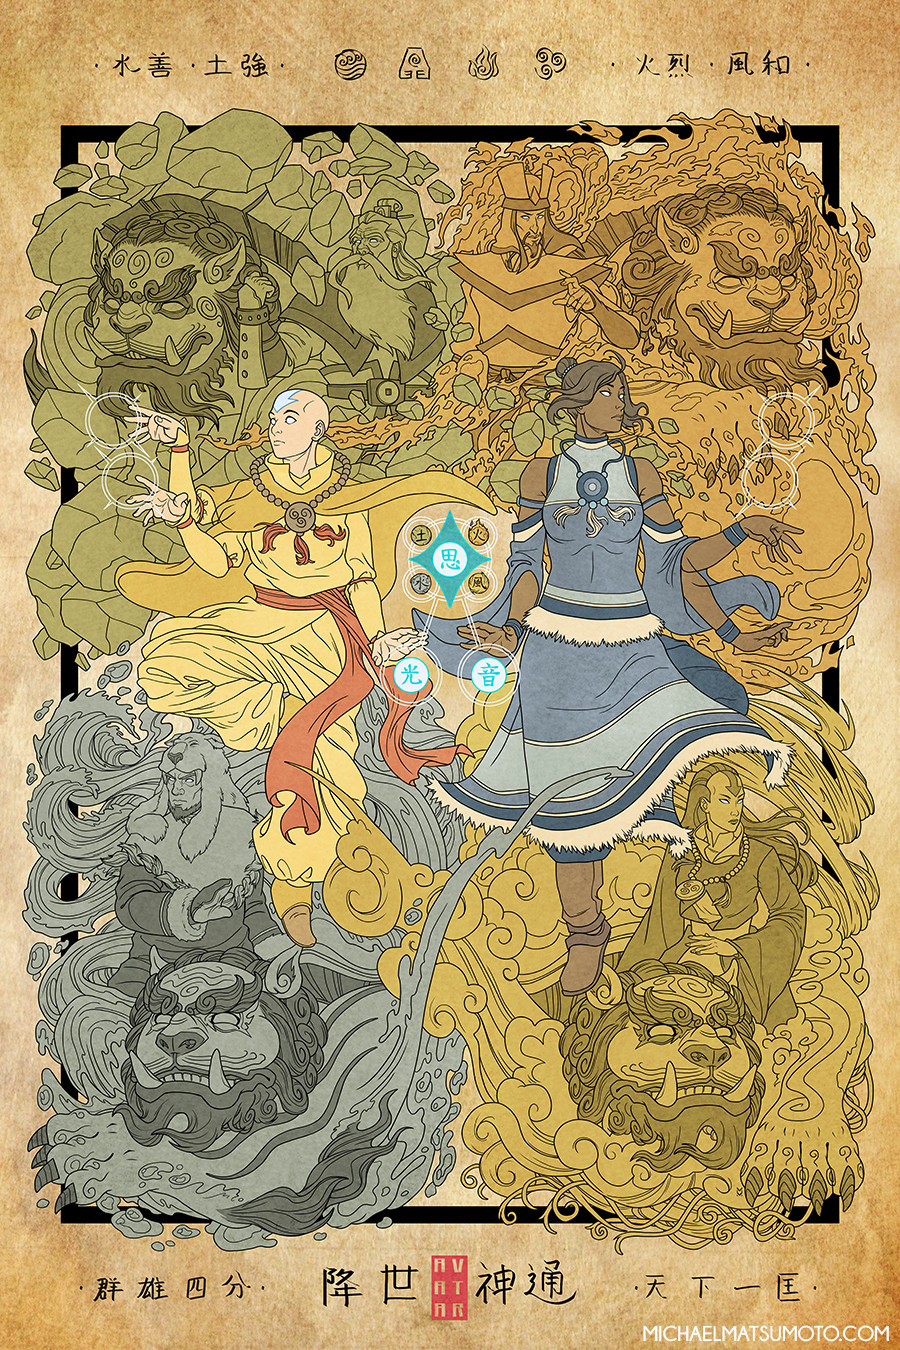 1girl aang avatar:_the_last_airbender avatar_(series) bald chinese_clothes earth fire fish highres korra long_hair michael_matsumoto people pose the_legend_of_korra wind